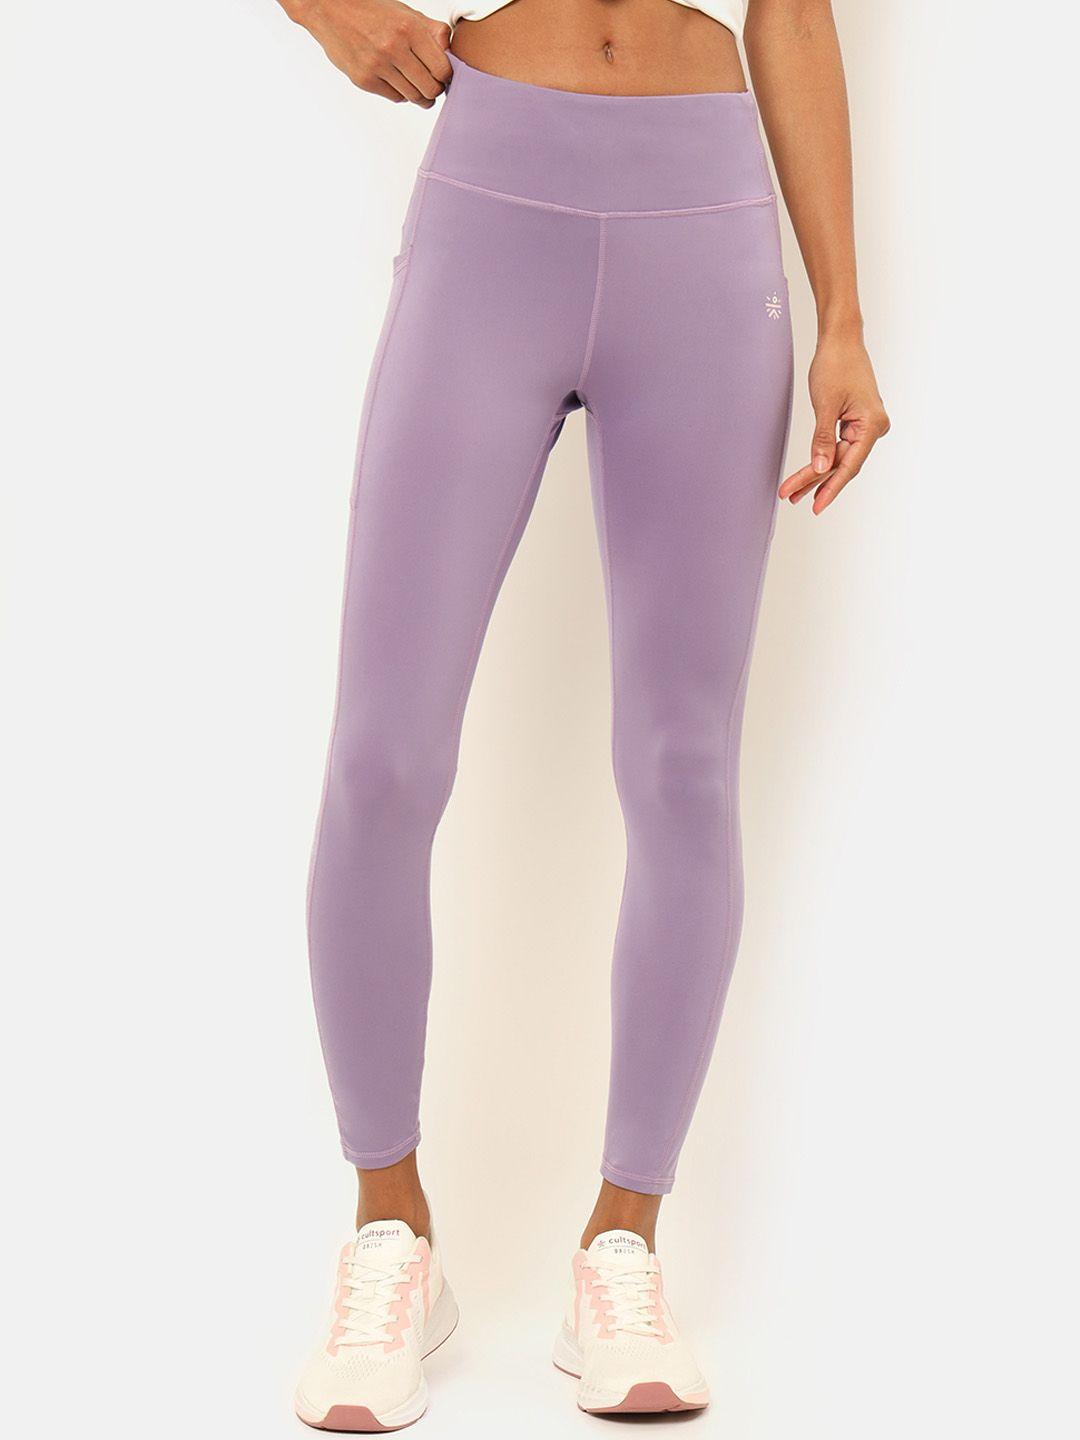 cultsport women lavender solid tights